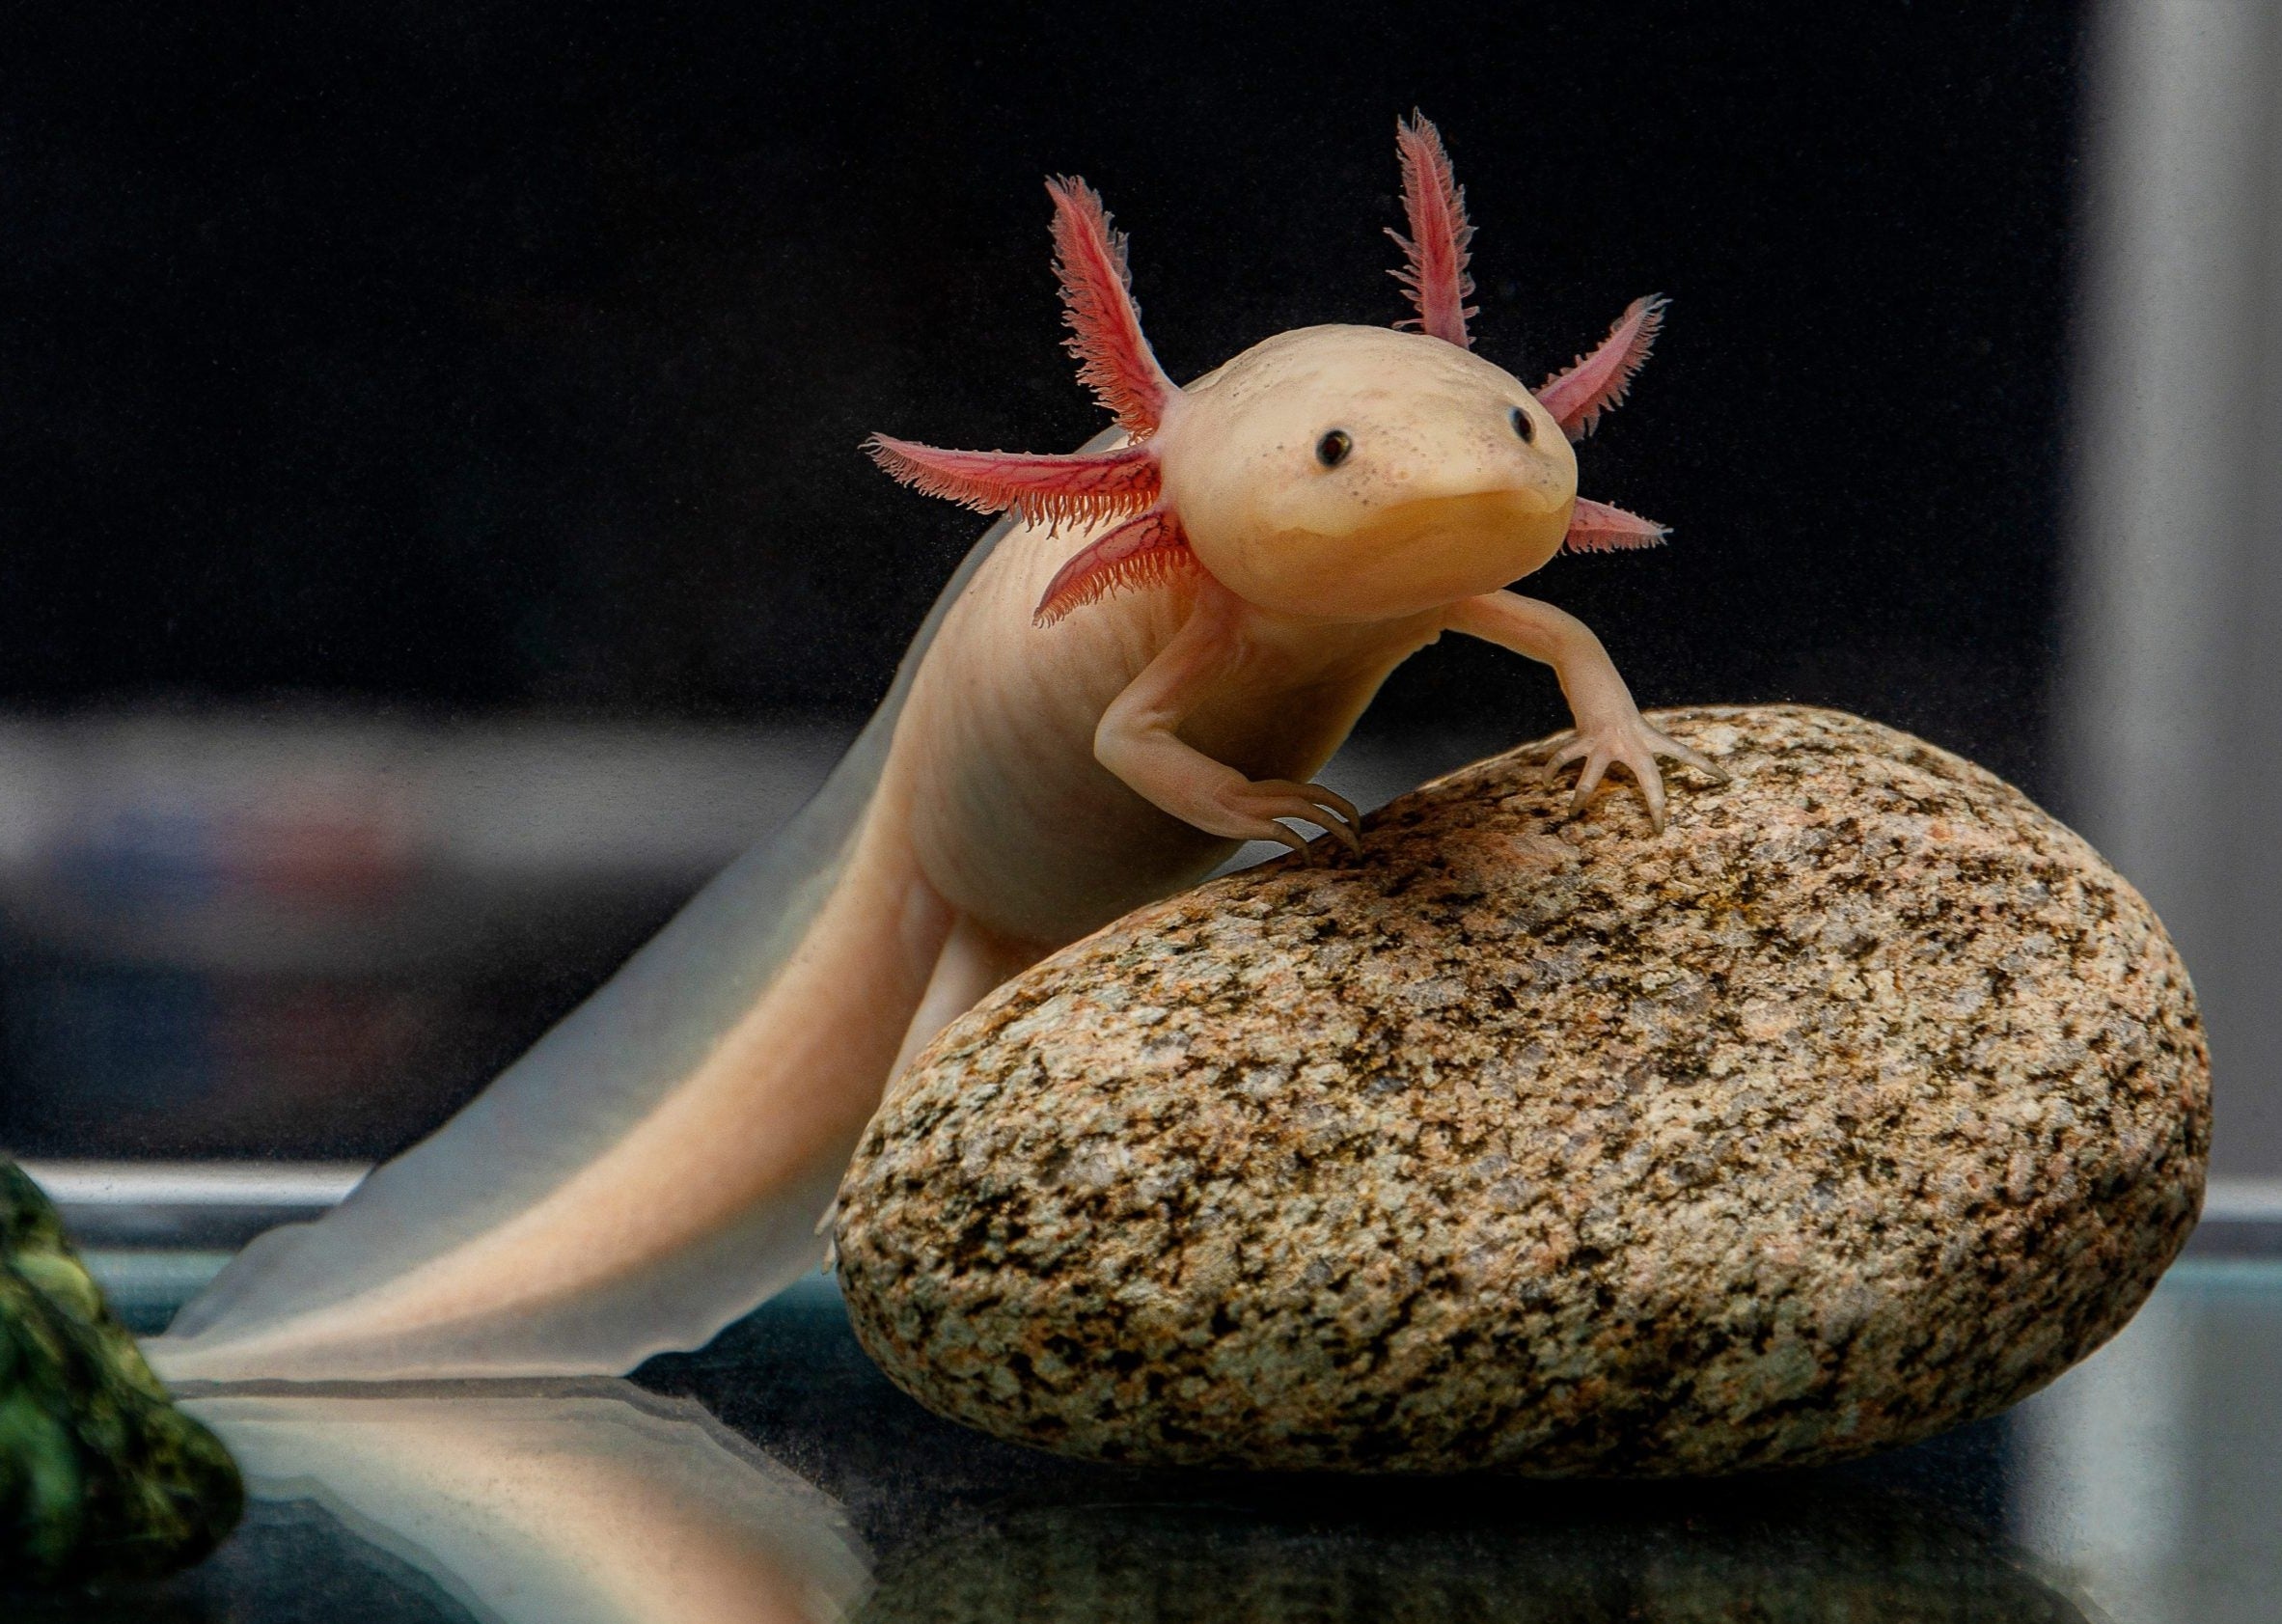 Axolotl - lizard fish with red 6 horn like fins by it's head